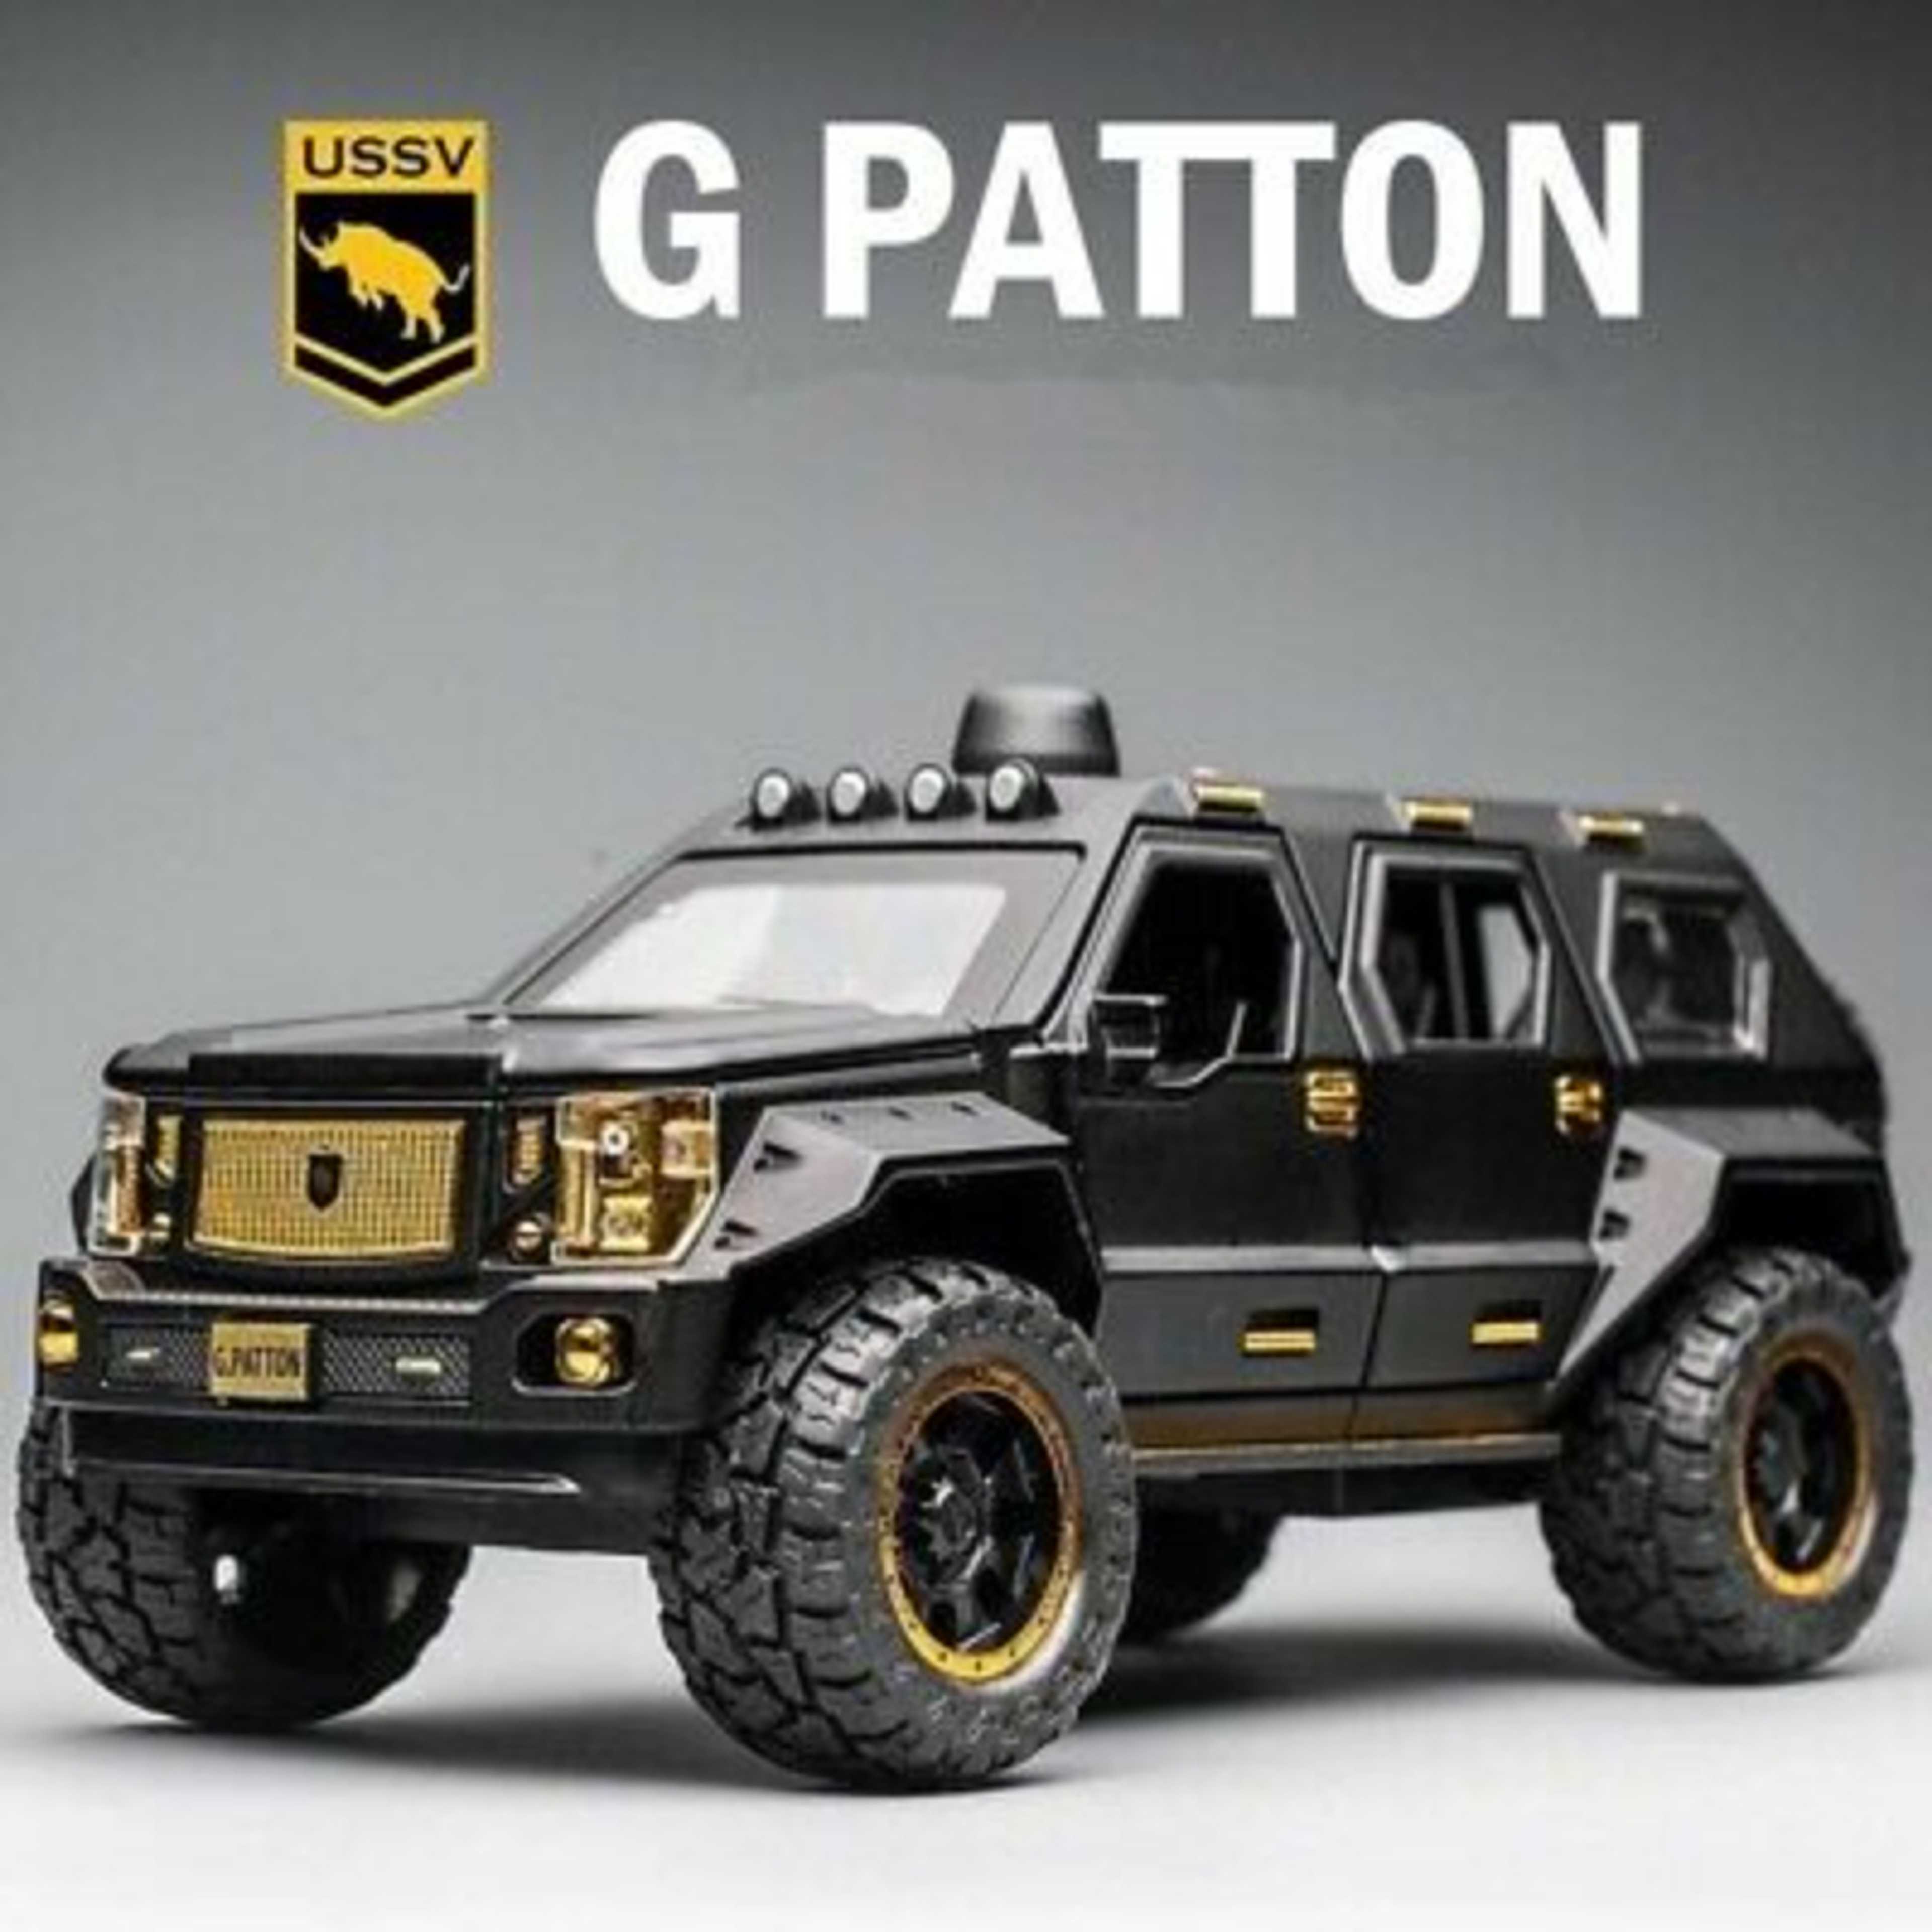 1:24 Diecast Chariot George Patton Off Road SUV